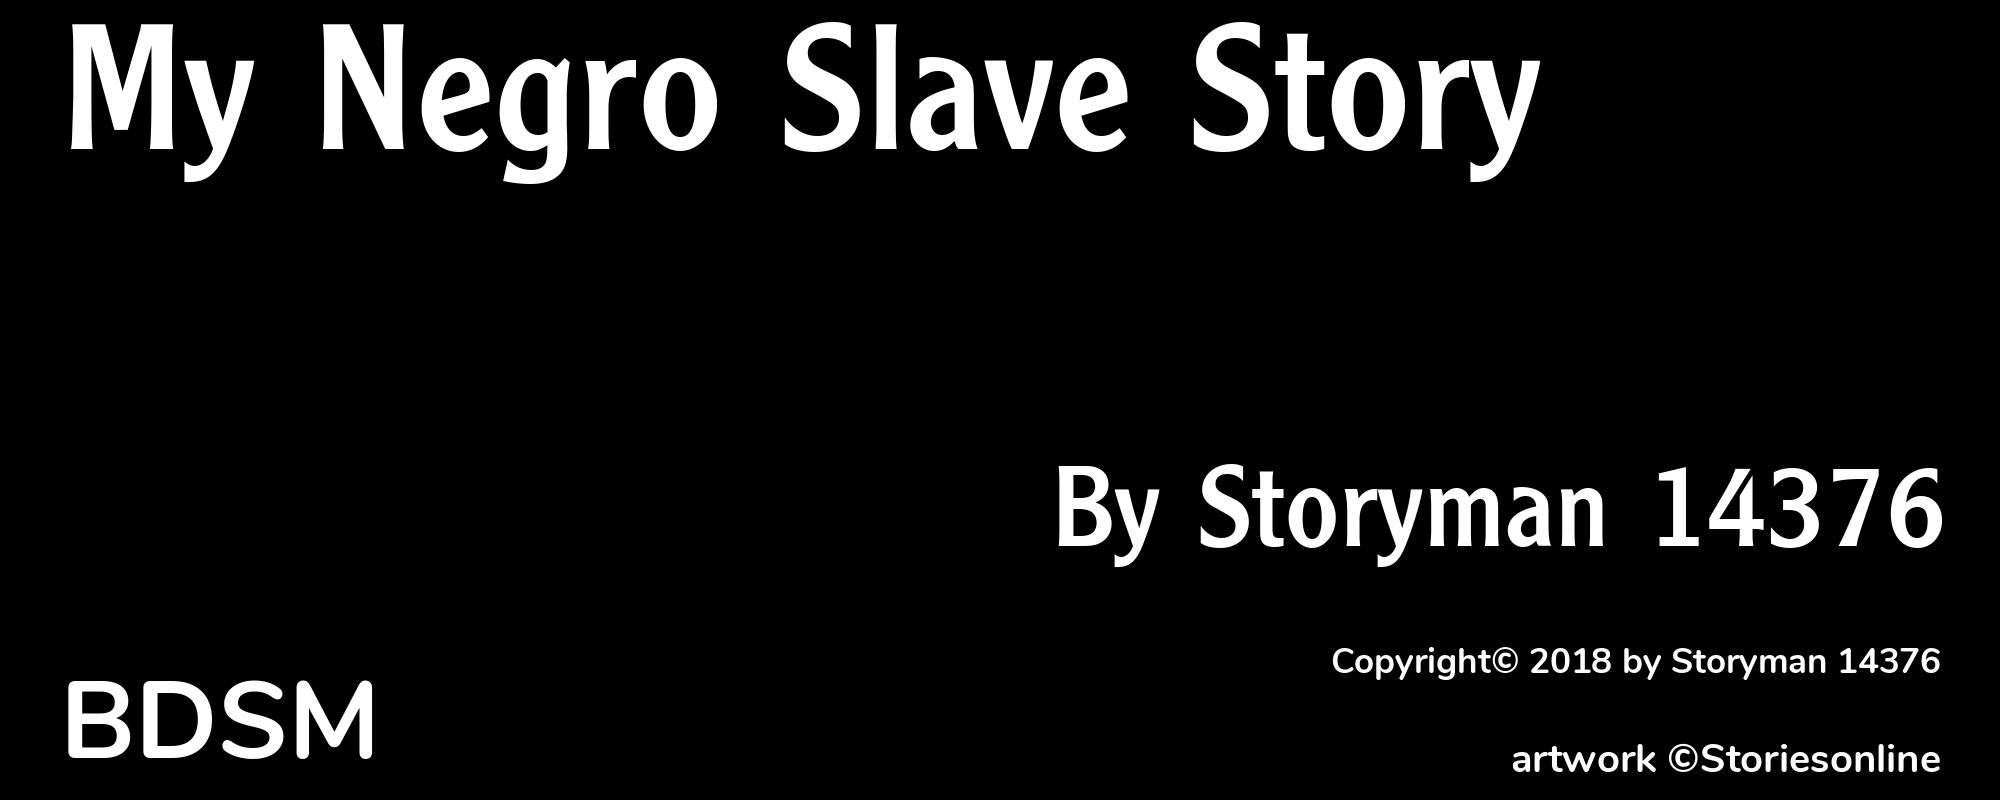 My Negro Slave Story - Cover